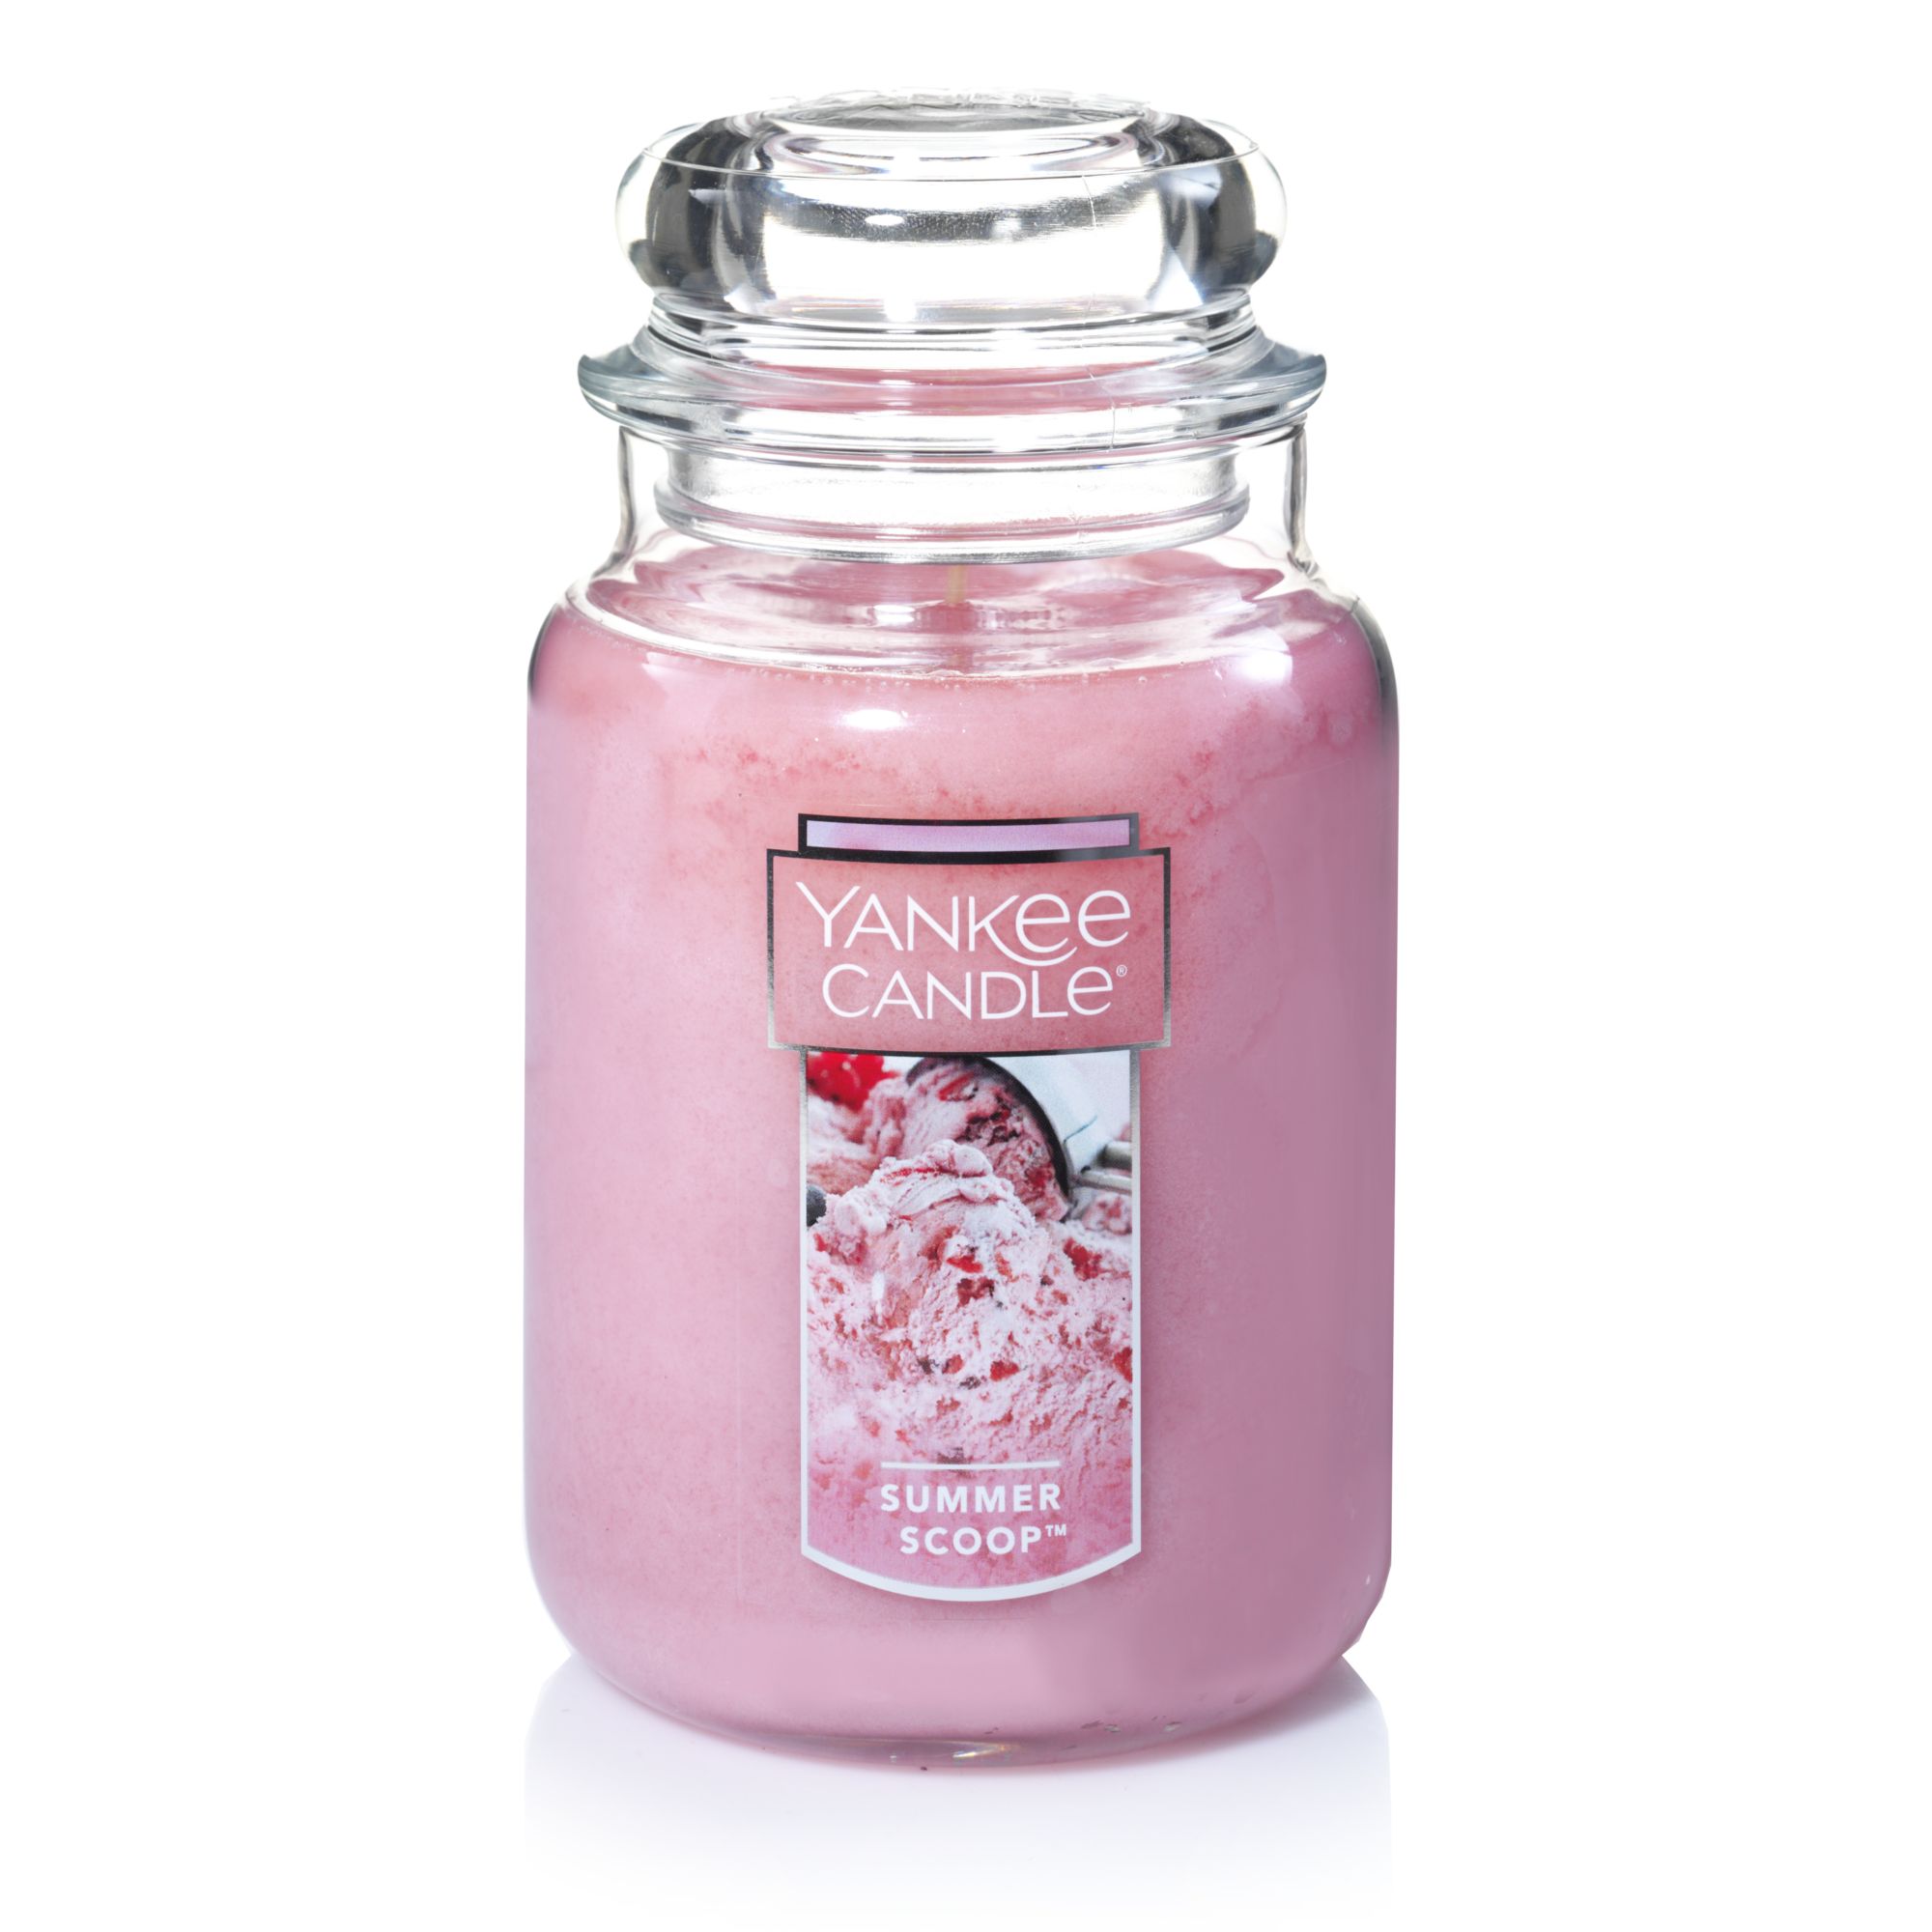 ☆☆SPARKLING FIREFLIES☆☆LARGE YANKEE CANDLE JAR 22OZ☆☆FREE EXPEDITED SHIPPING 